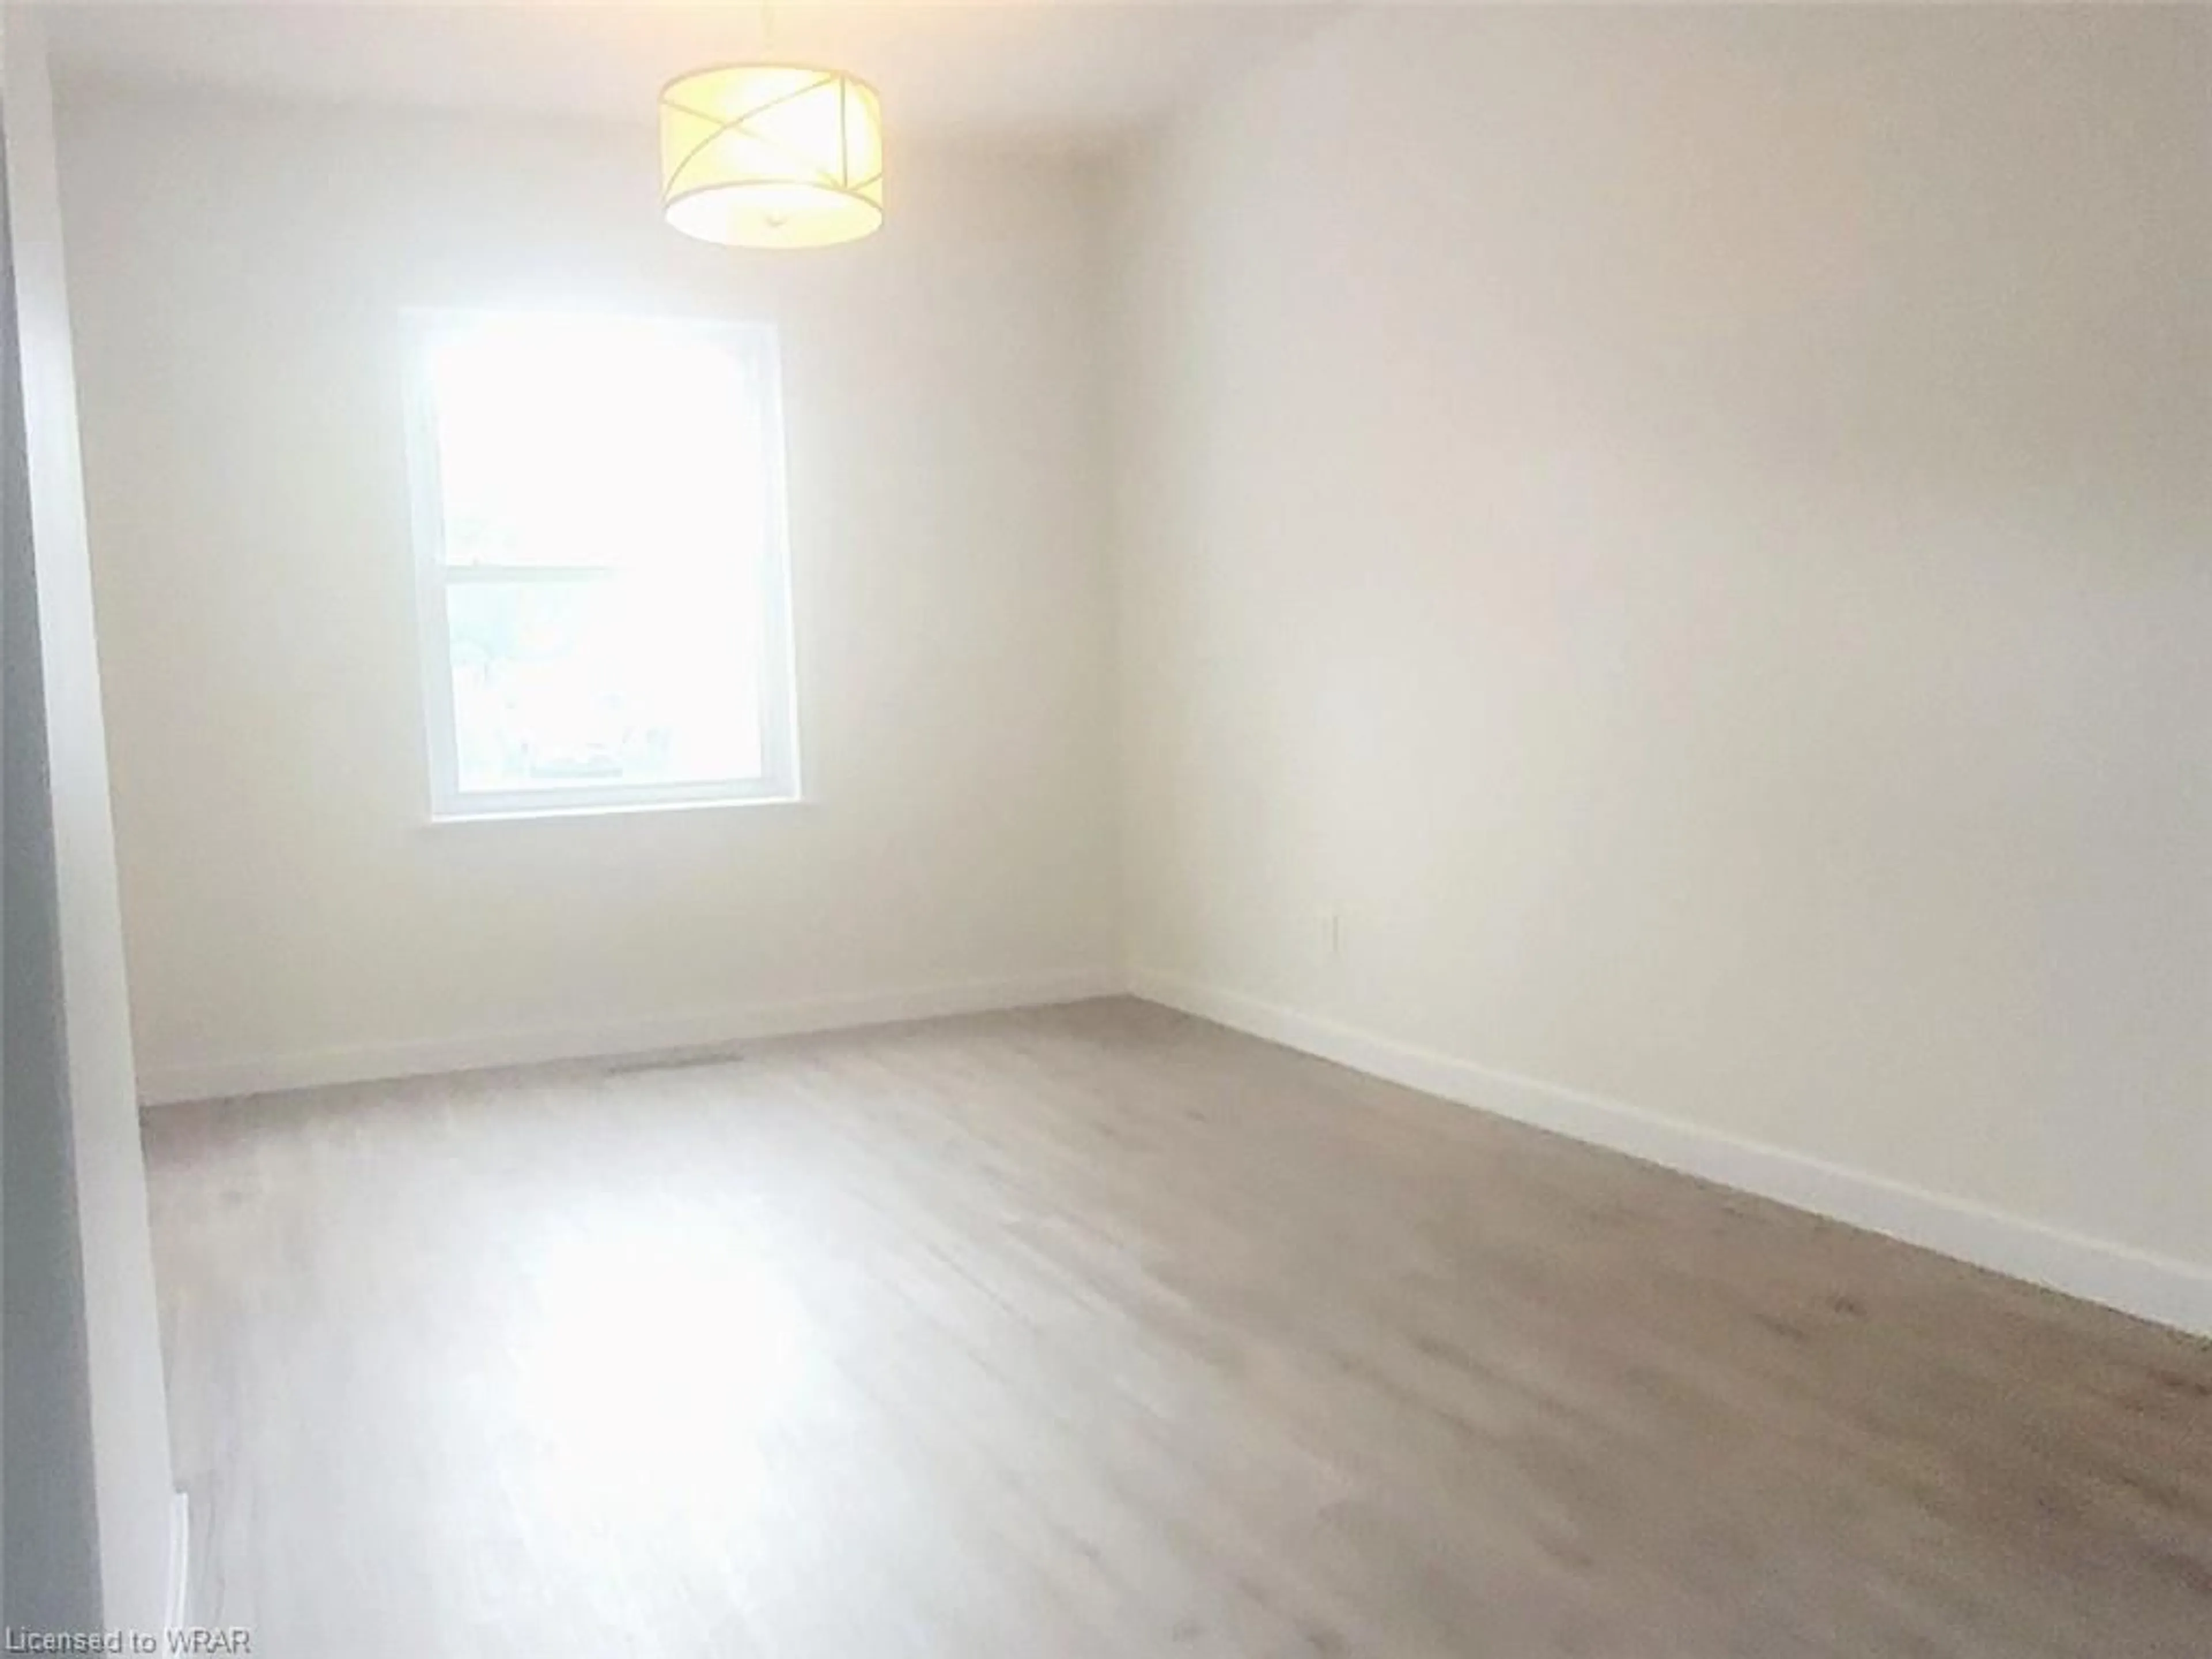 A pic of a room for 743 Cedar St, North Bay Ontario P1B 6P7